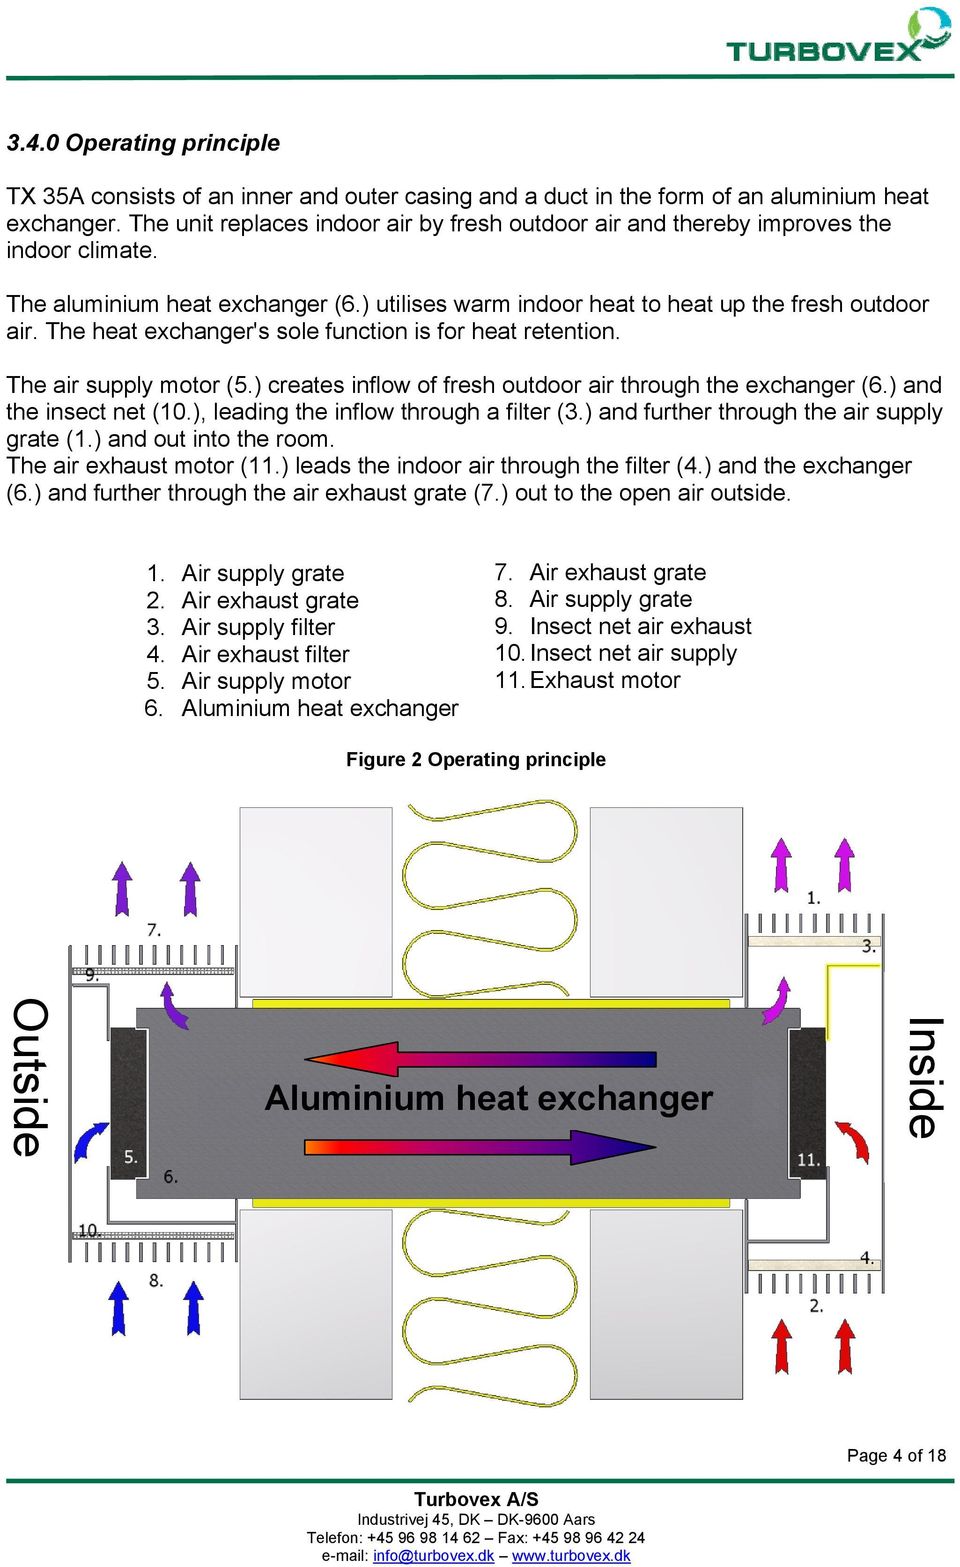 The heat exchanger's sole function is for heat retention. The air supply motor (5.) creates inflow of fresh outdoor air through the exchanger (6.) and the insect net (10.